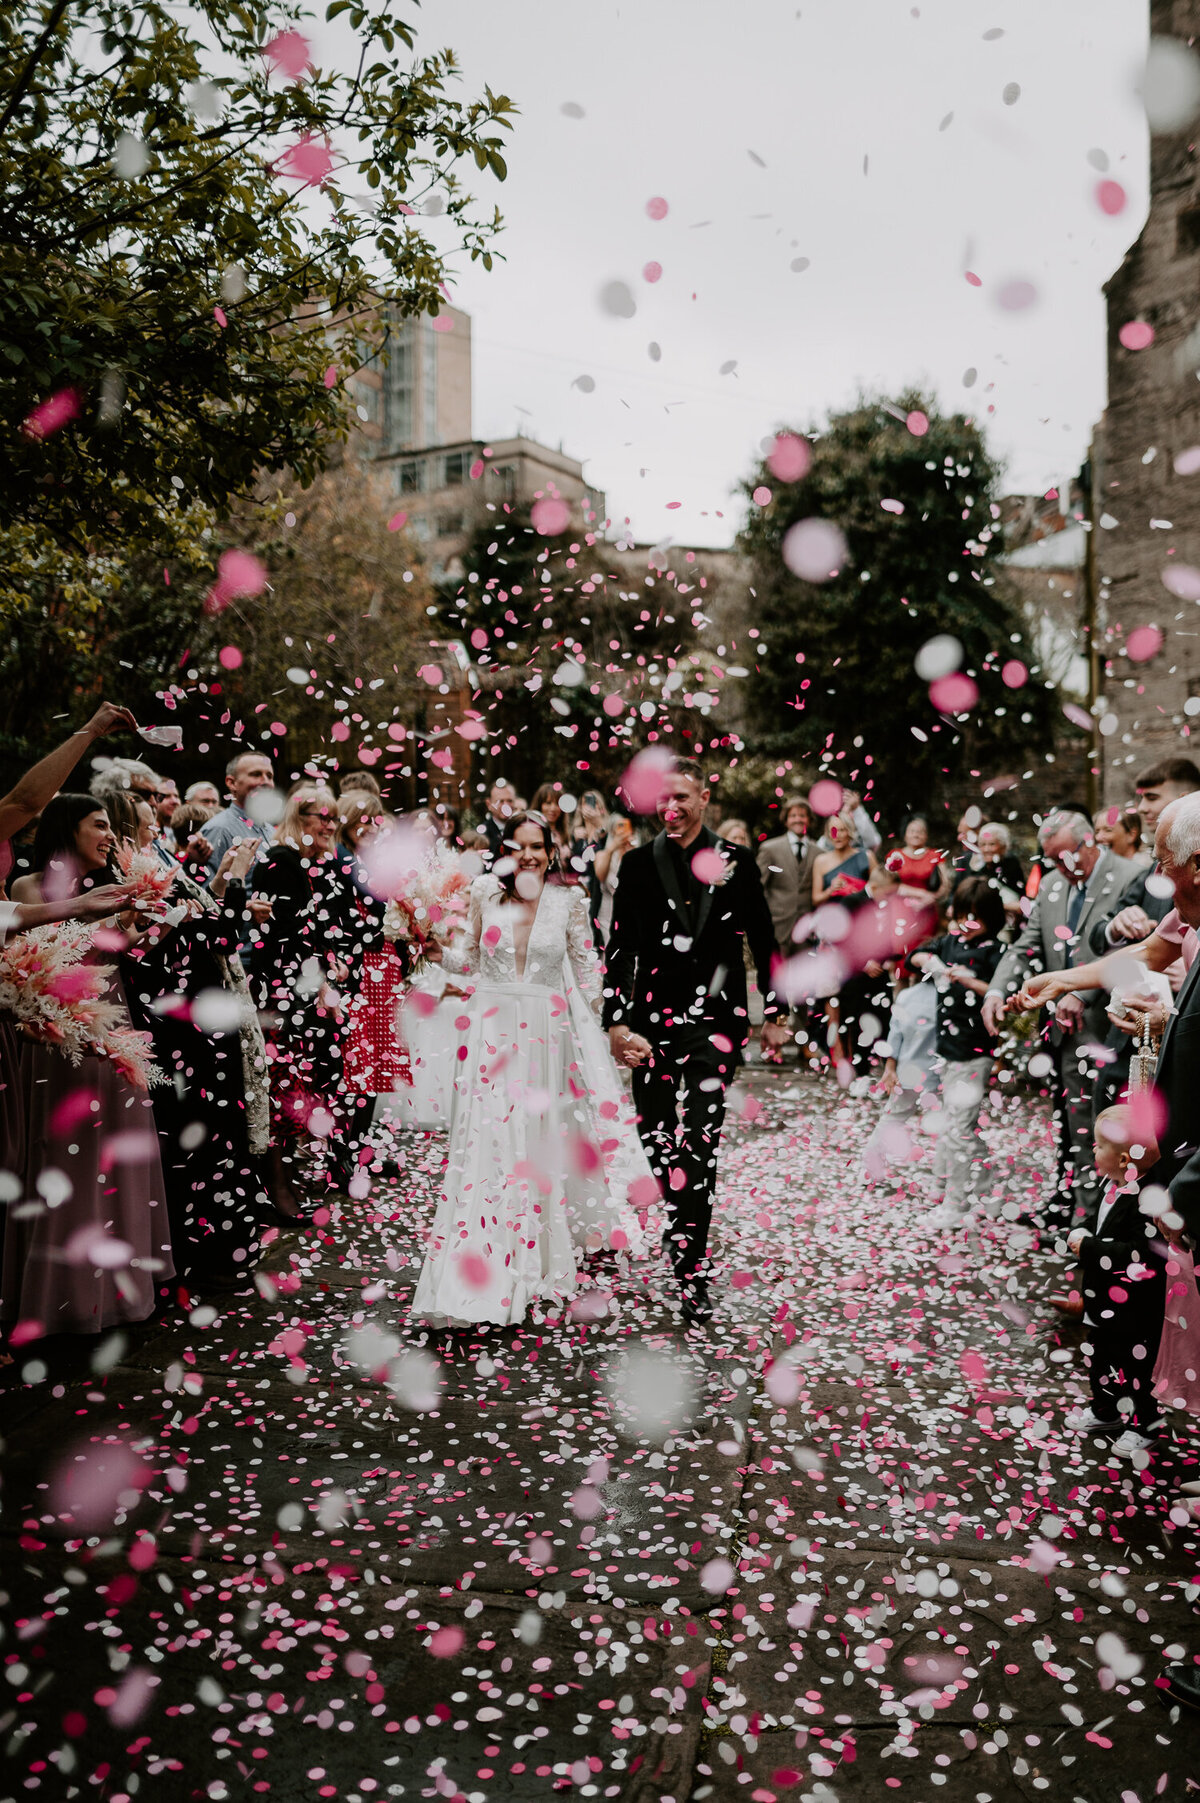 Guests throw pink confetti as a bride and groom exit The Mount Without in Bristol.